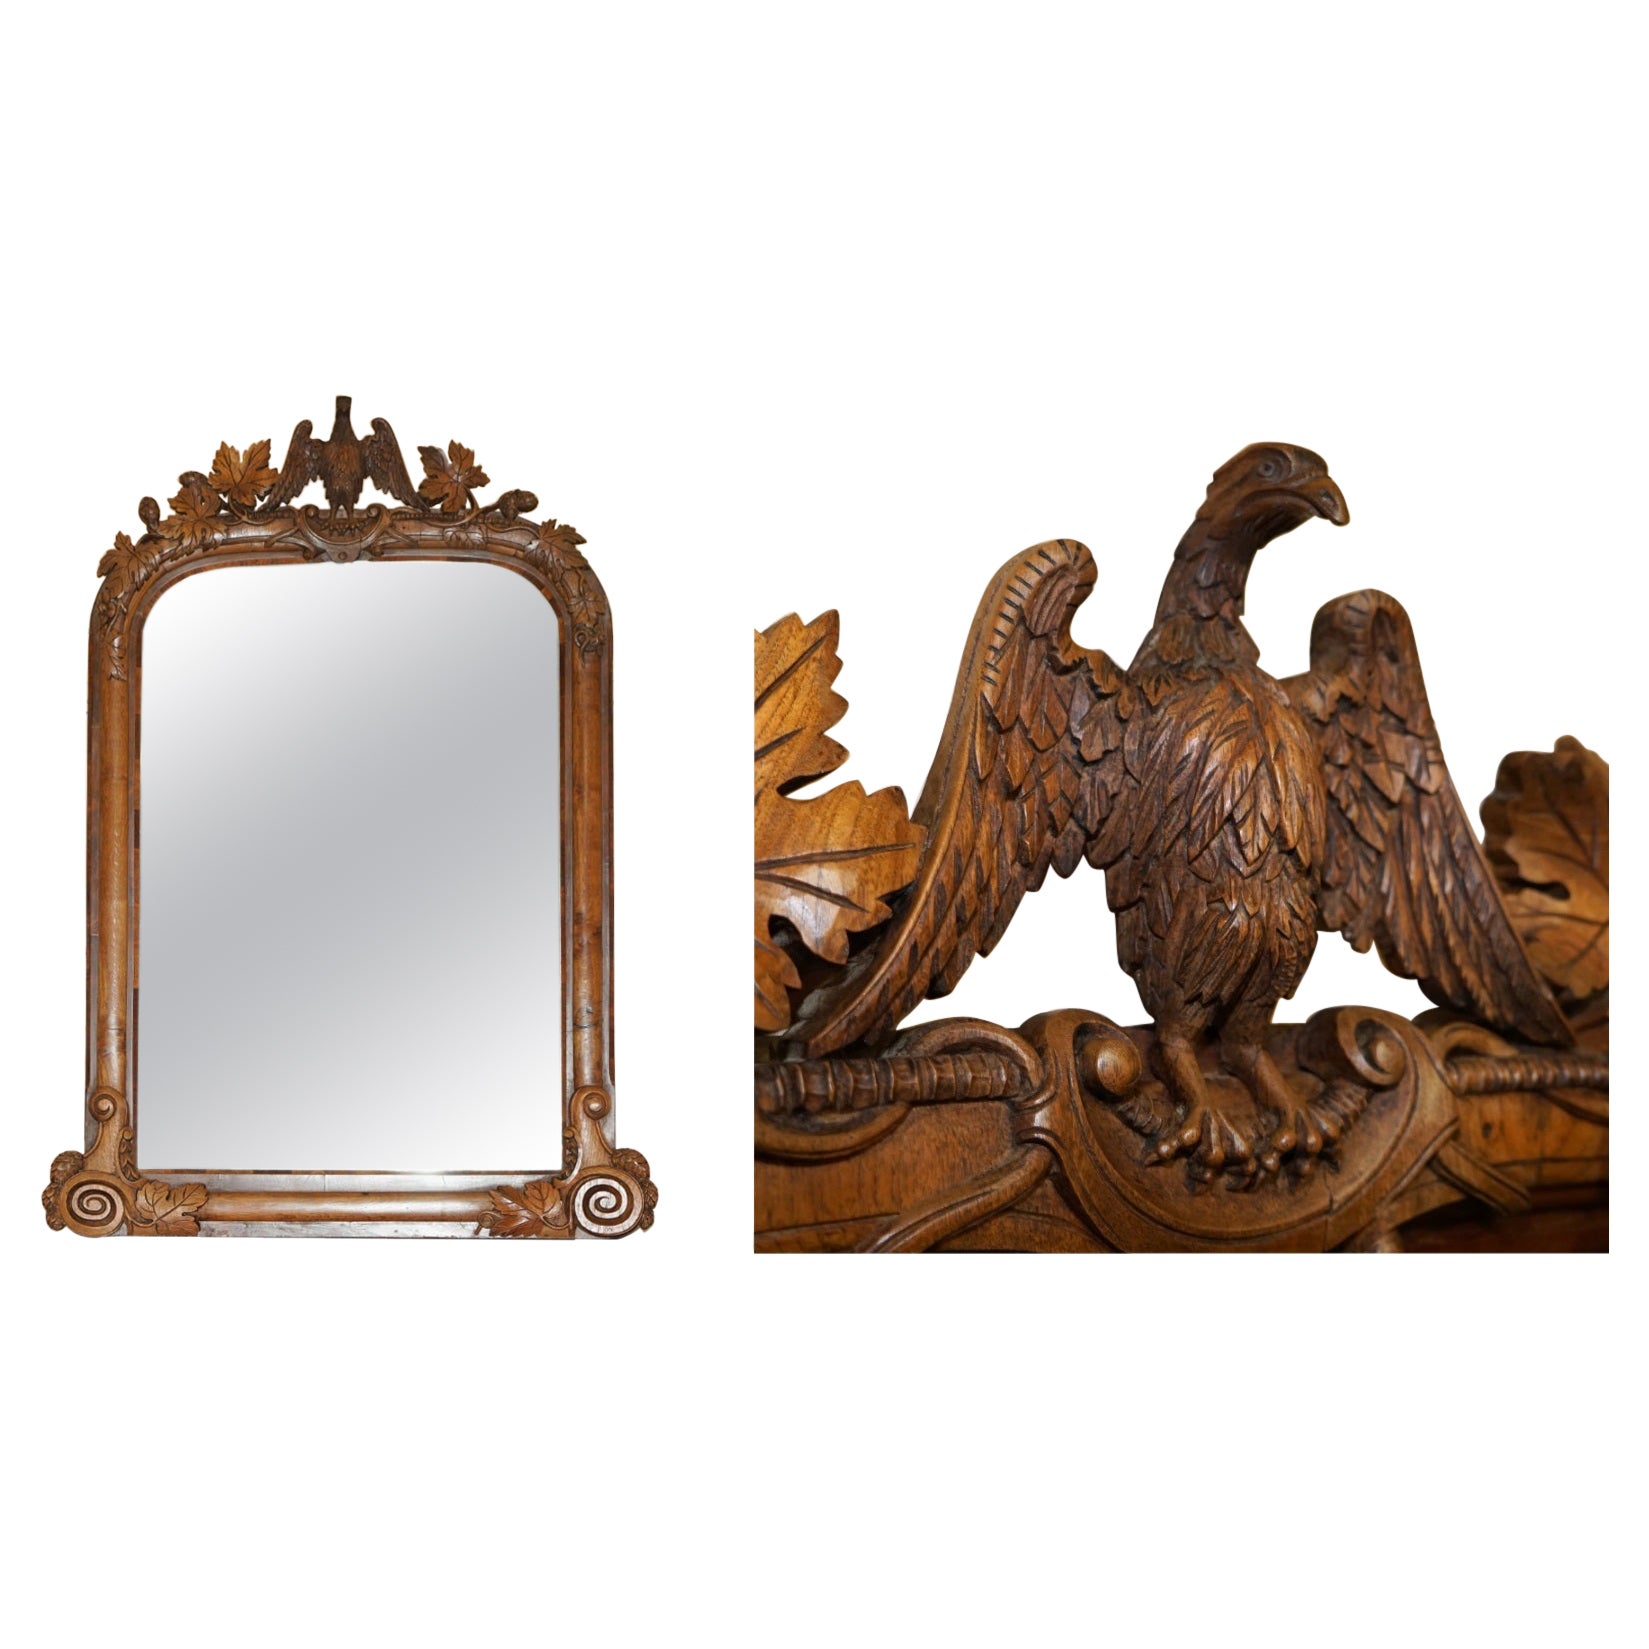 High Victorian Mantel Mirrors and Fireplace Mirrors